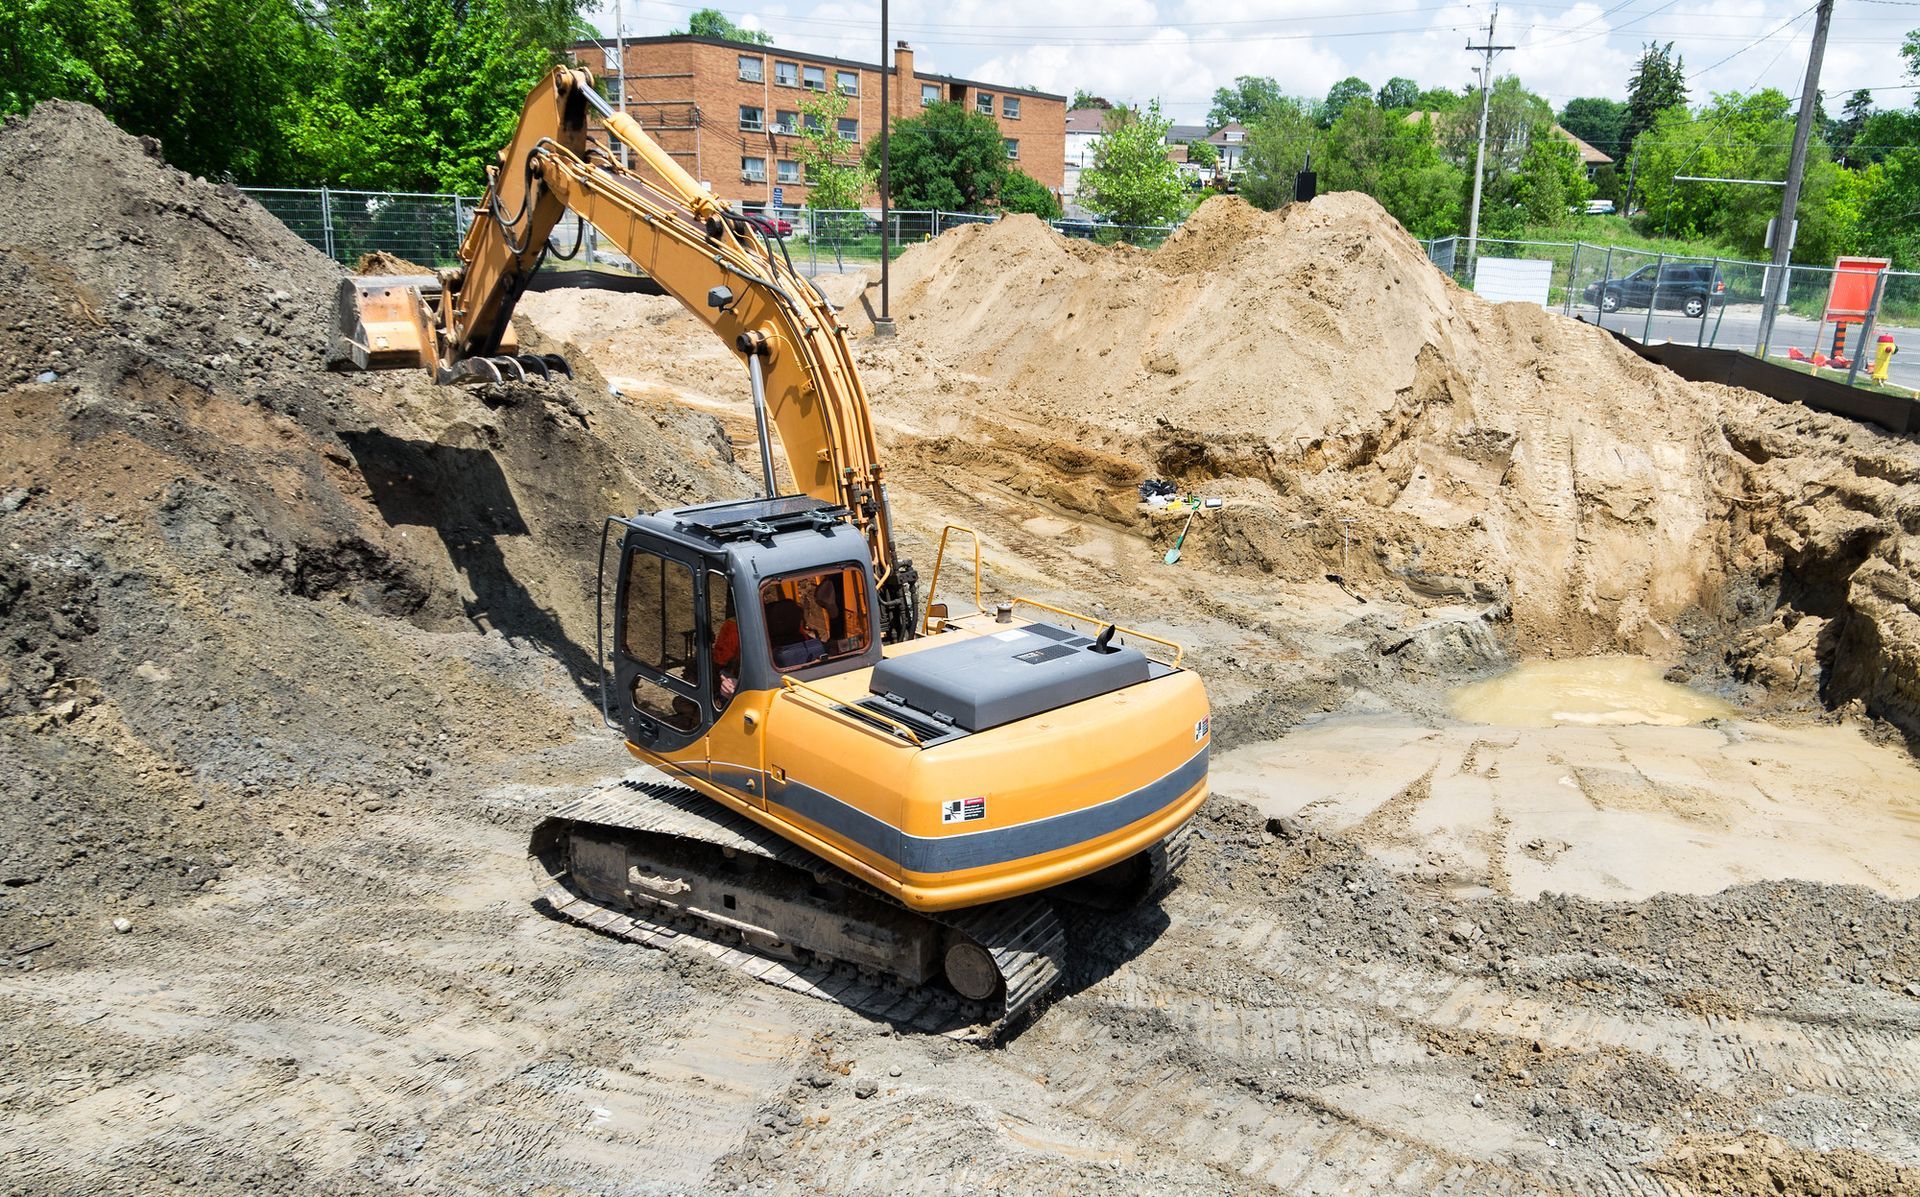 a yellow excavator is digging a hole in a pile of dirt .